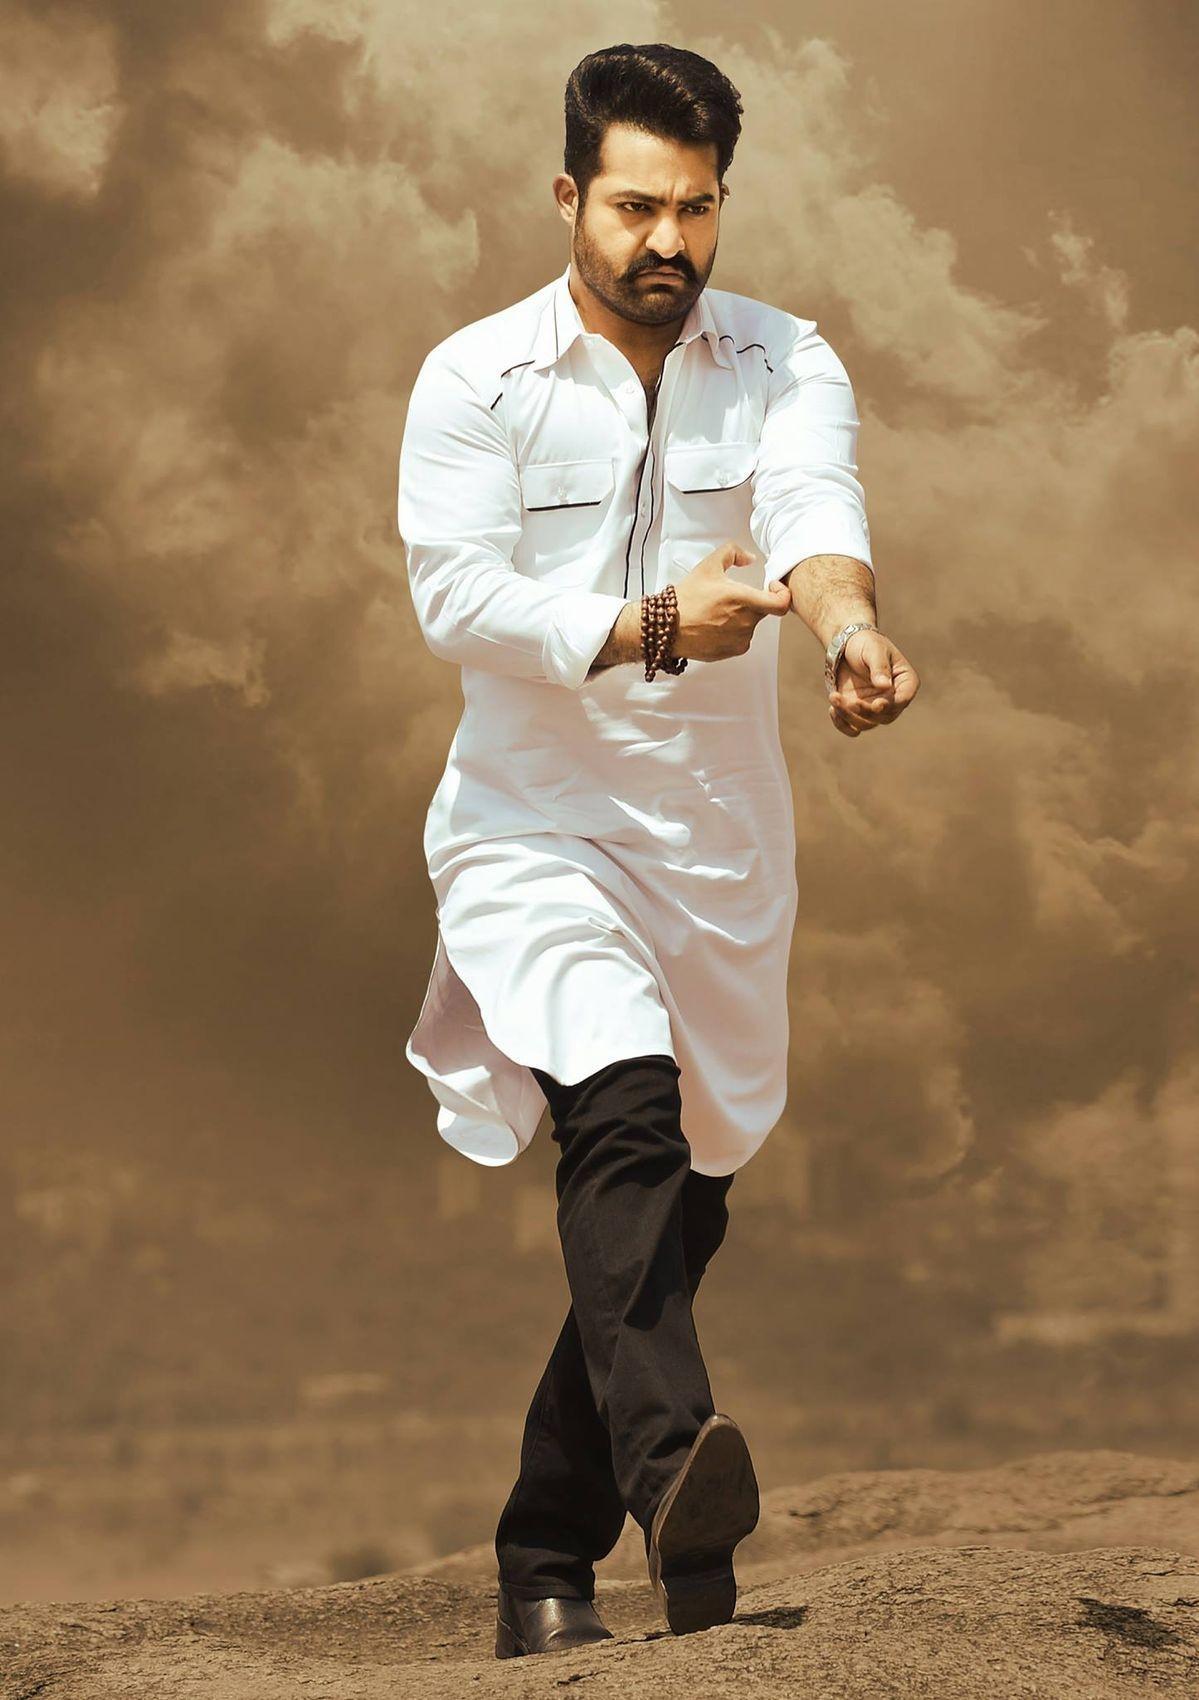 Jr Ntr New HD Wallpaper For Android Apk